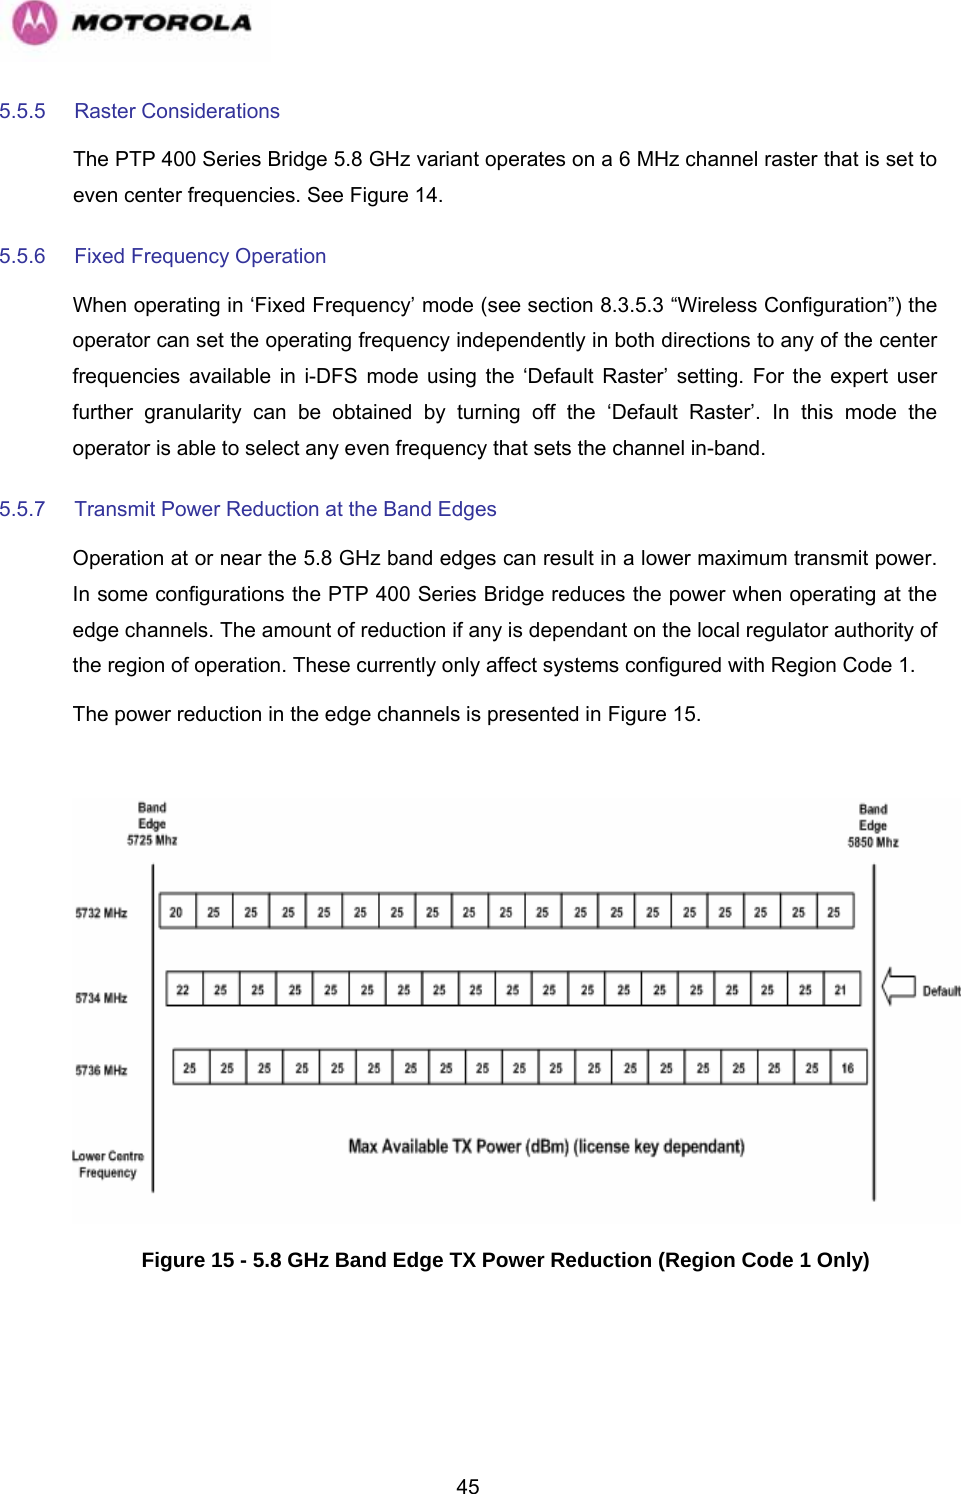   455.5.5 Raster Considerations The PTP 400 Series Bridge 5.8 GHz variant operates on a 6 MHz channel raster that is set to even center frequencies. See Figure 14. 5.5.6  Fixed Frequency Operation When operating in ‘Fixed Frequency’ mode (see section 8.3.5.3 “Wireless Configuration”) the operator can set the operating frequency independently in both directions to any of the center frequencies available in i-DFS mode using the ‘Default Raster’ setting. For the expert user further granularity can be obtained by turning off the ‘Default Raster’. In this mode the operator is able to select any even frequency that sets the channel in-band.  5.5.7  Transmit Power Reduction at the Band Edges Operation at or near the 5.8 GHz band edges can result in a lower maximum transmit power. In some configurations the PTP 400 Series Bridge reduces the power when operating at the edge channels. The amount of reduction if any is dependant on the local regulator authority of the region of operation. These currently only affect systems configured with Region Code 1. The power reduction in the edge channels is presented in Figure 15.   Figure 15 - 5.8 GHz Band Edge TX Power Reduction (Region Code 1 Only)  